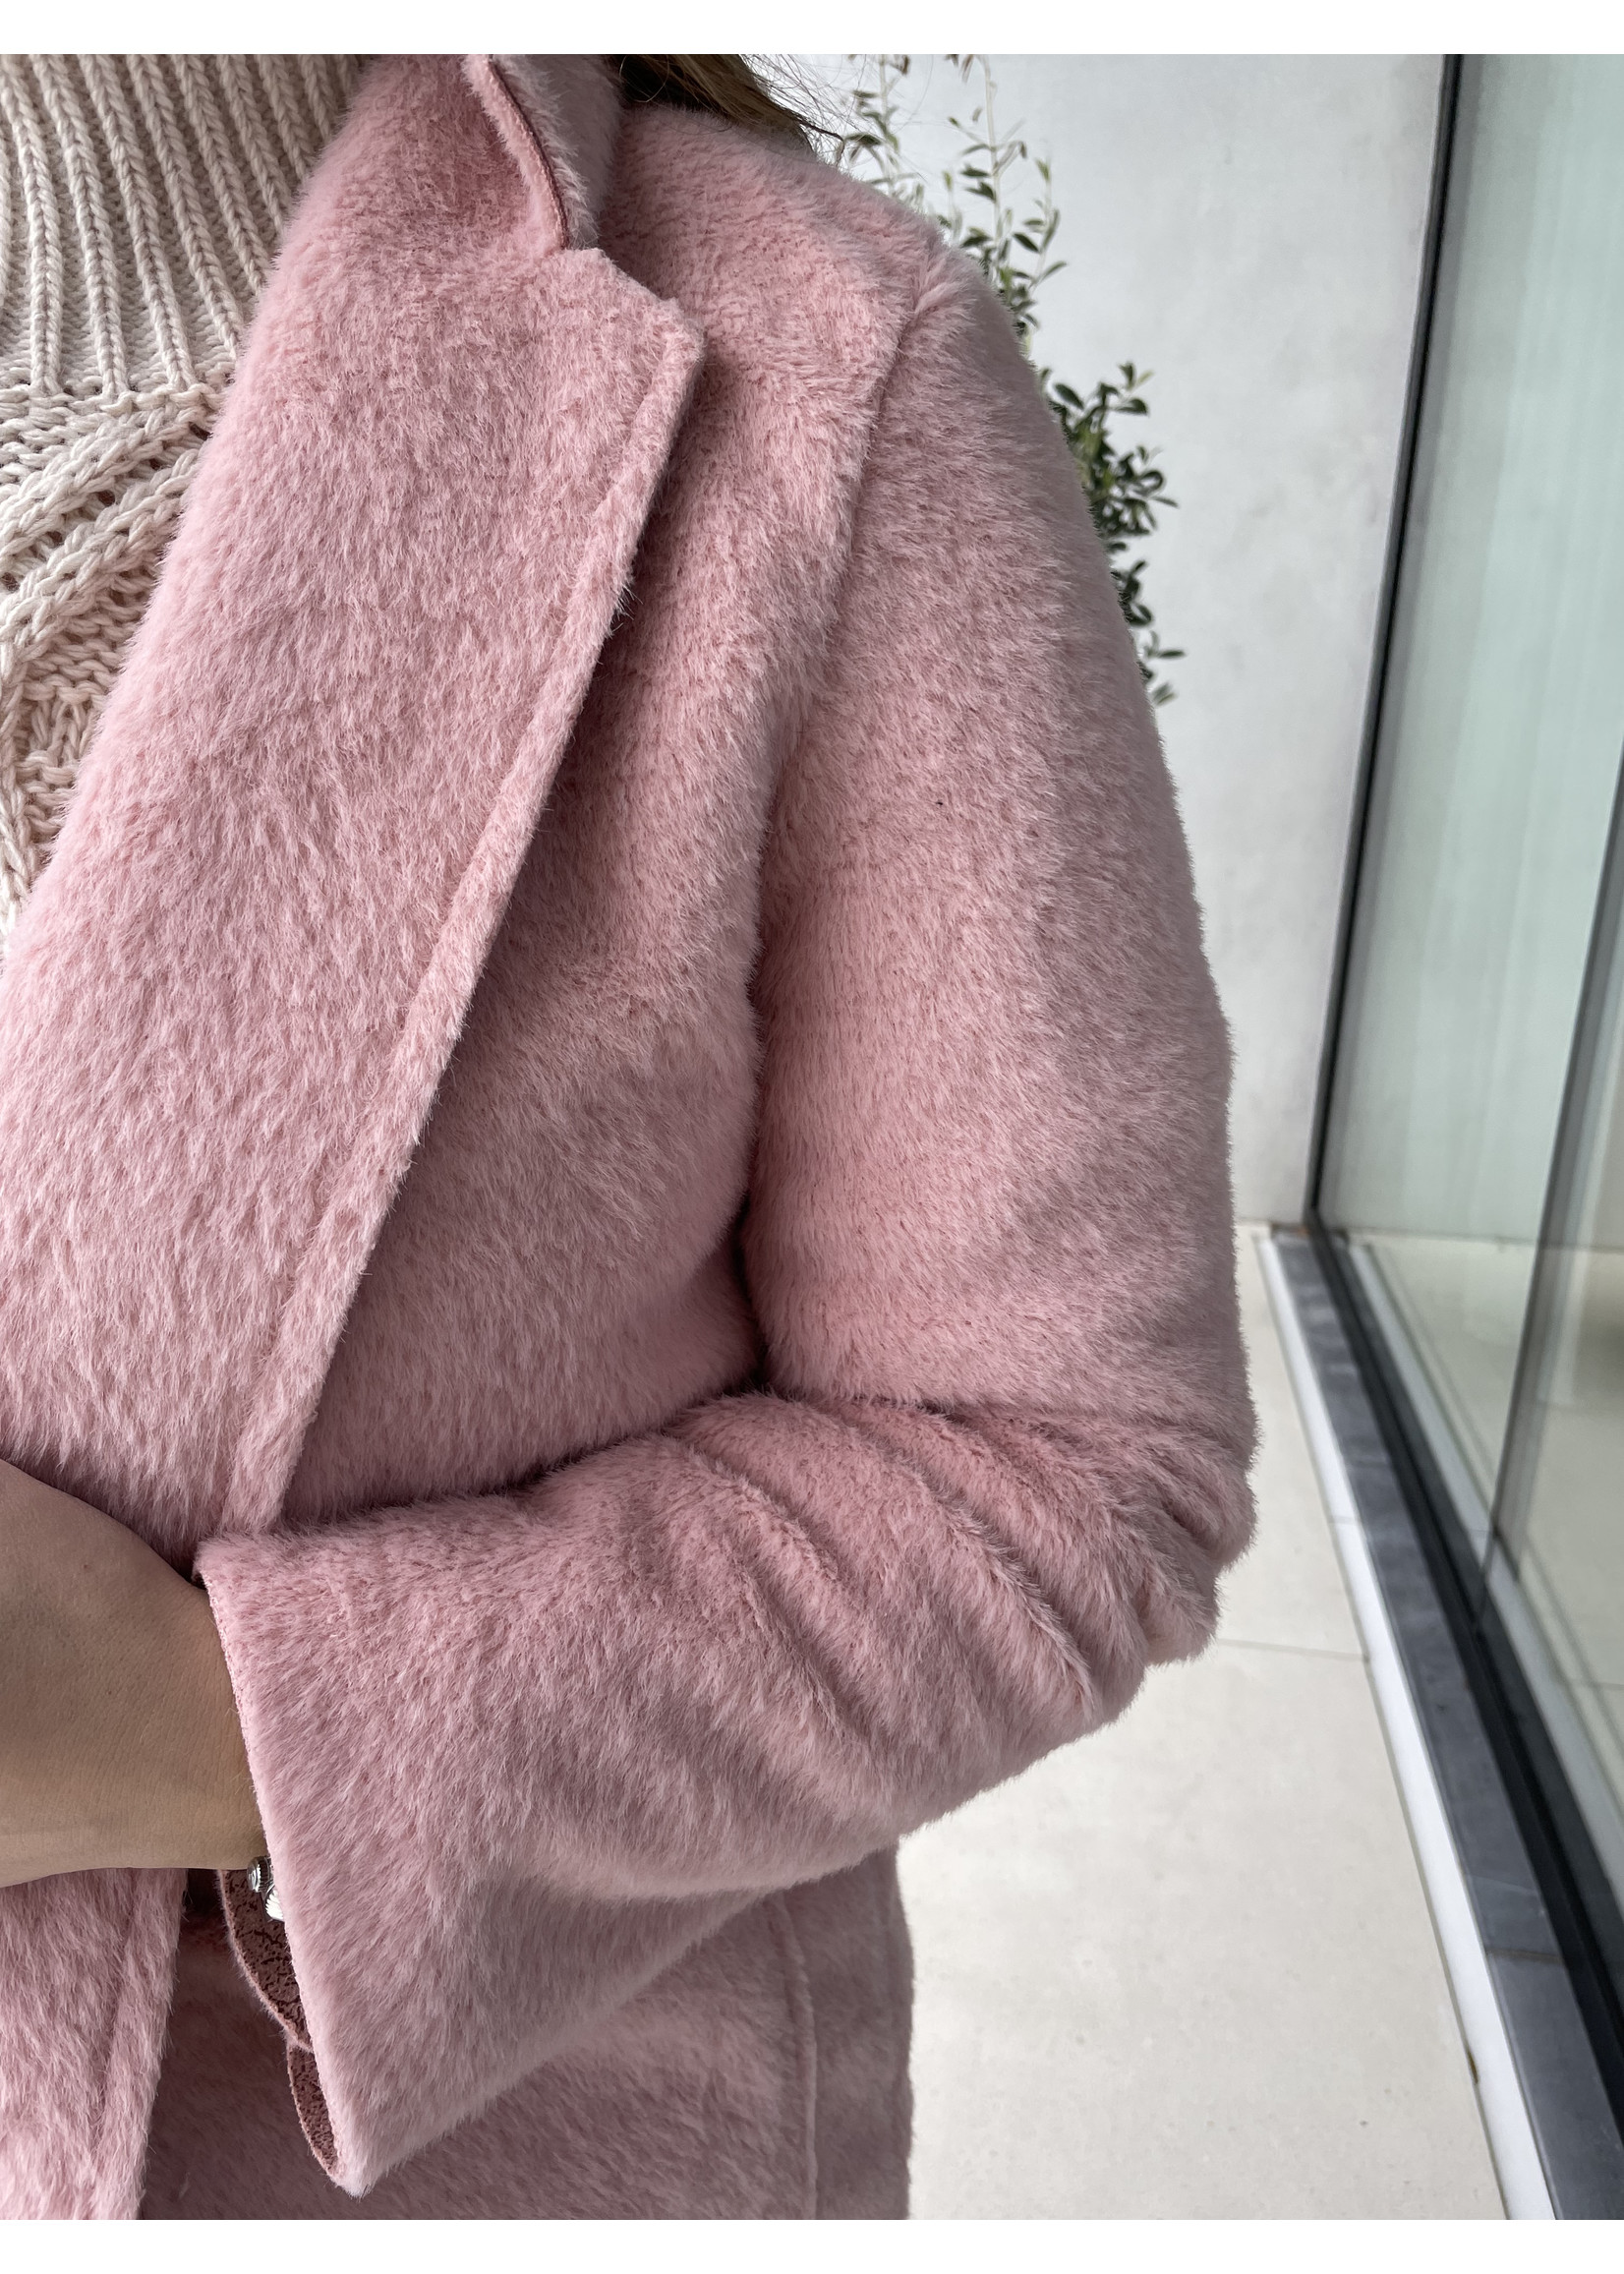 LILY LOU COAT - PINK - ONE SIZE